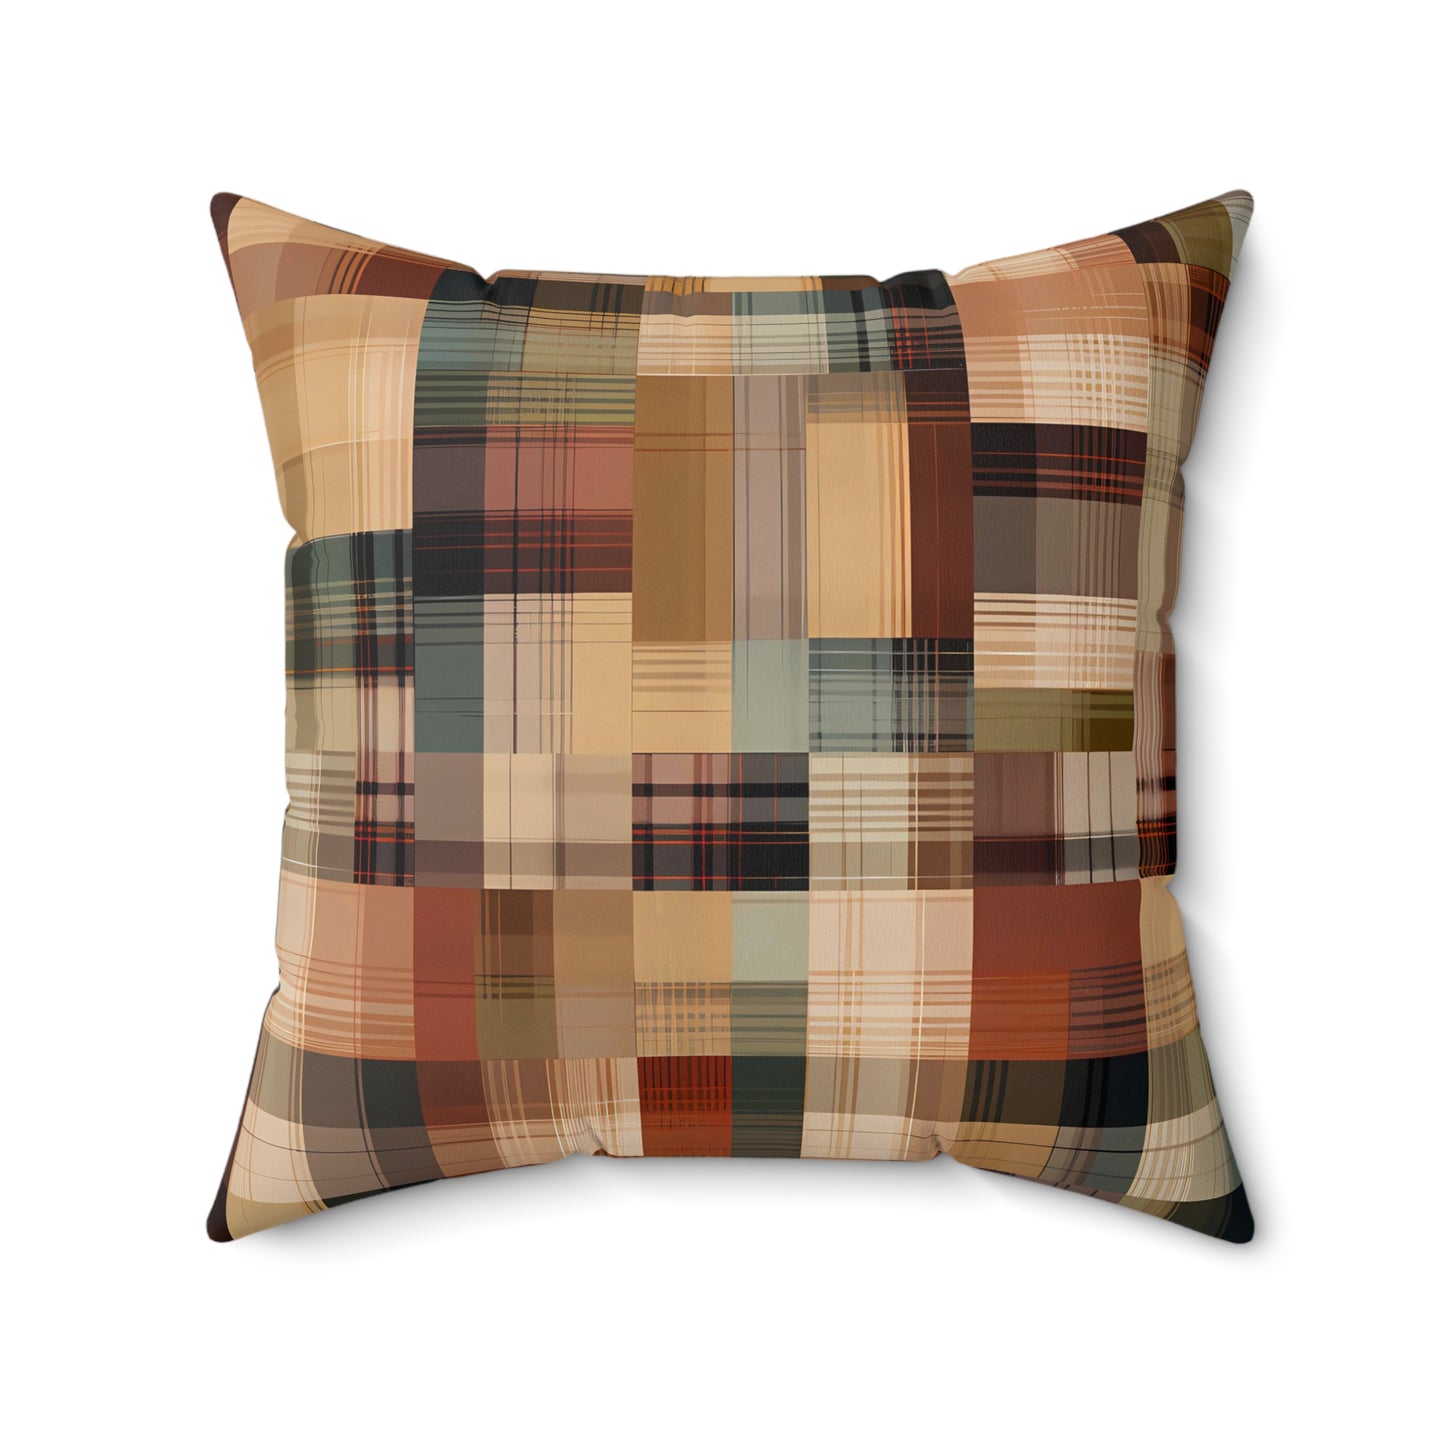 Abstract Plaid Spun Polyester Square Pillow